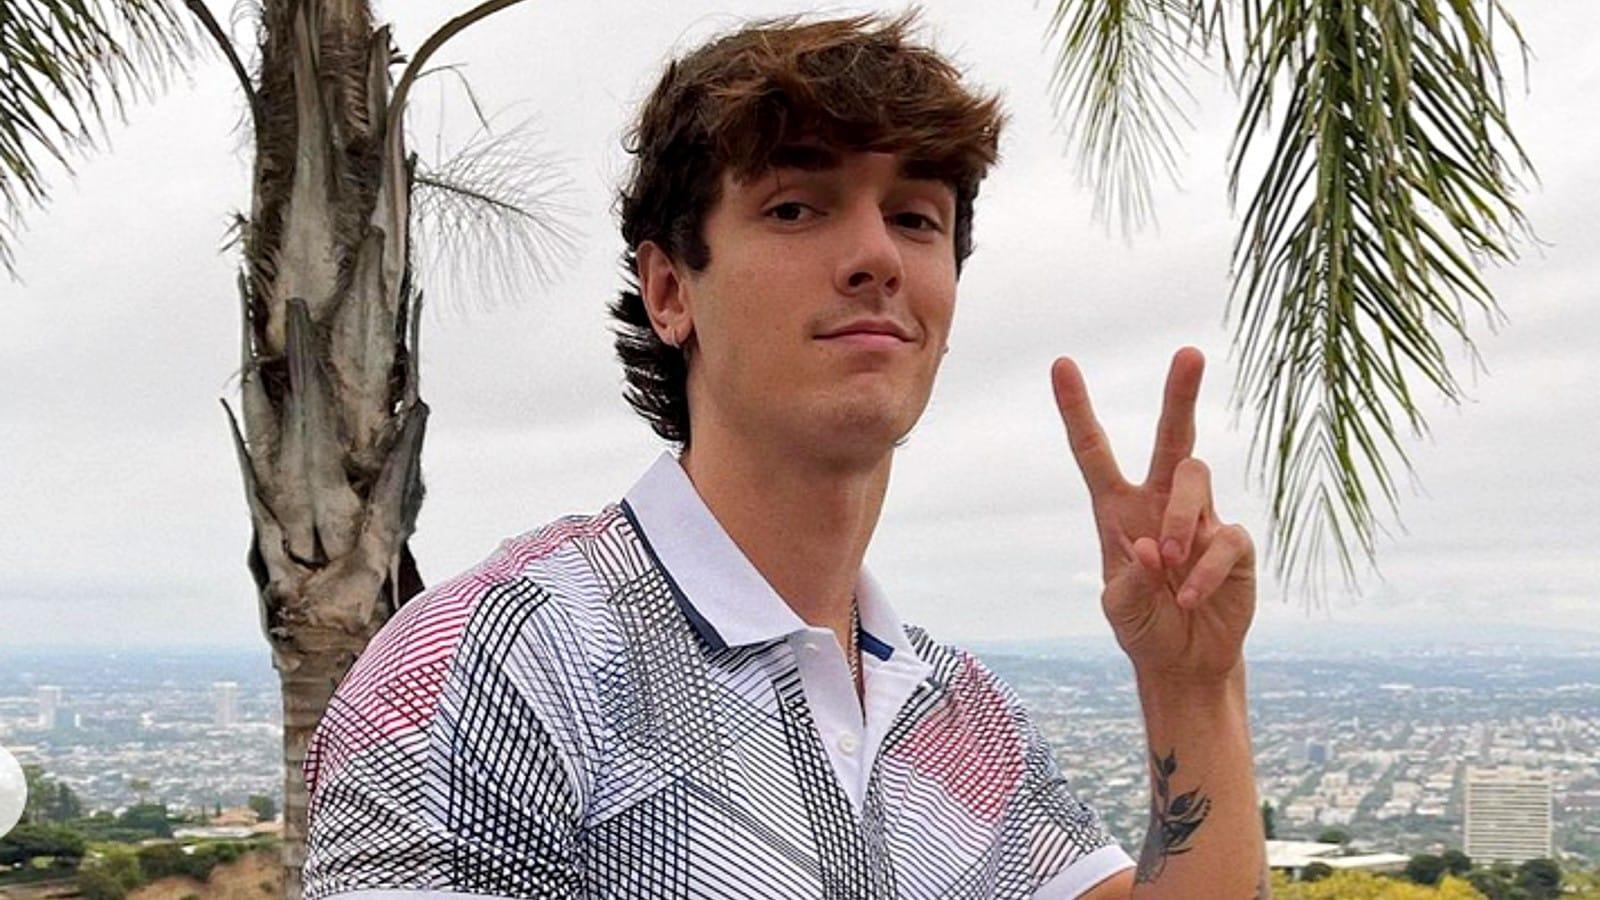 Bryce Hall poses with the peace sign